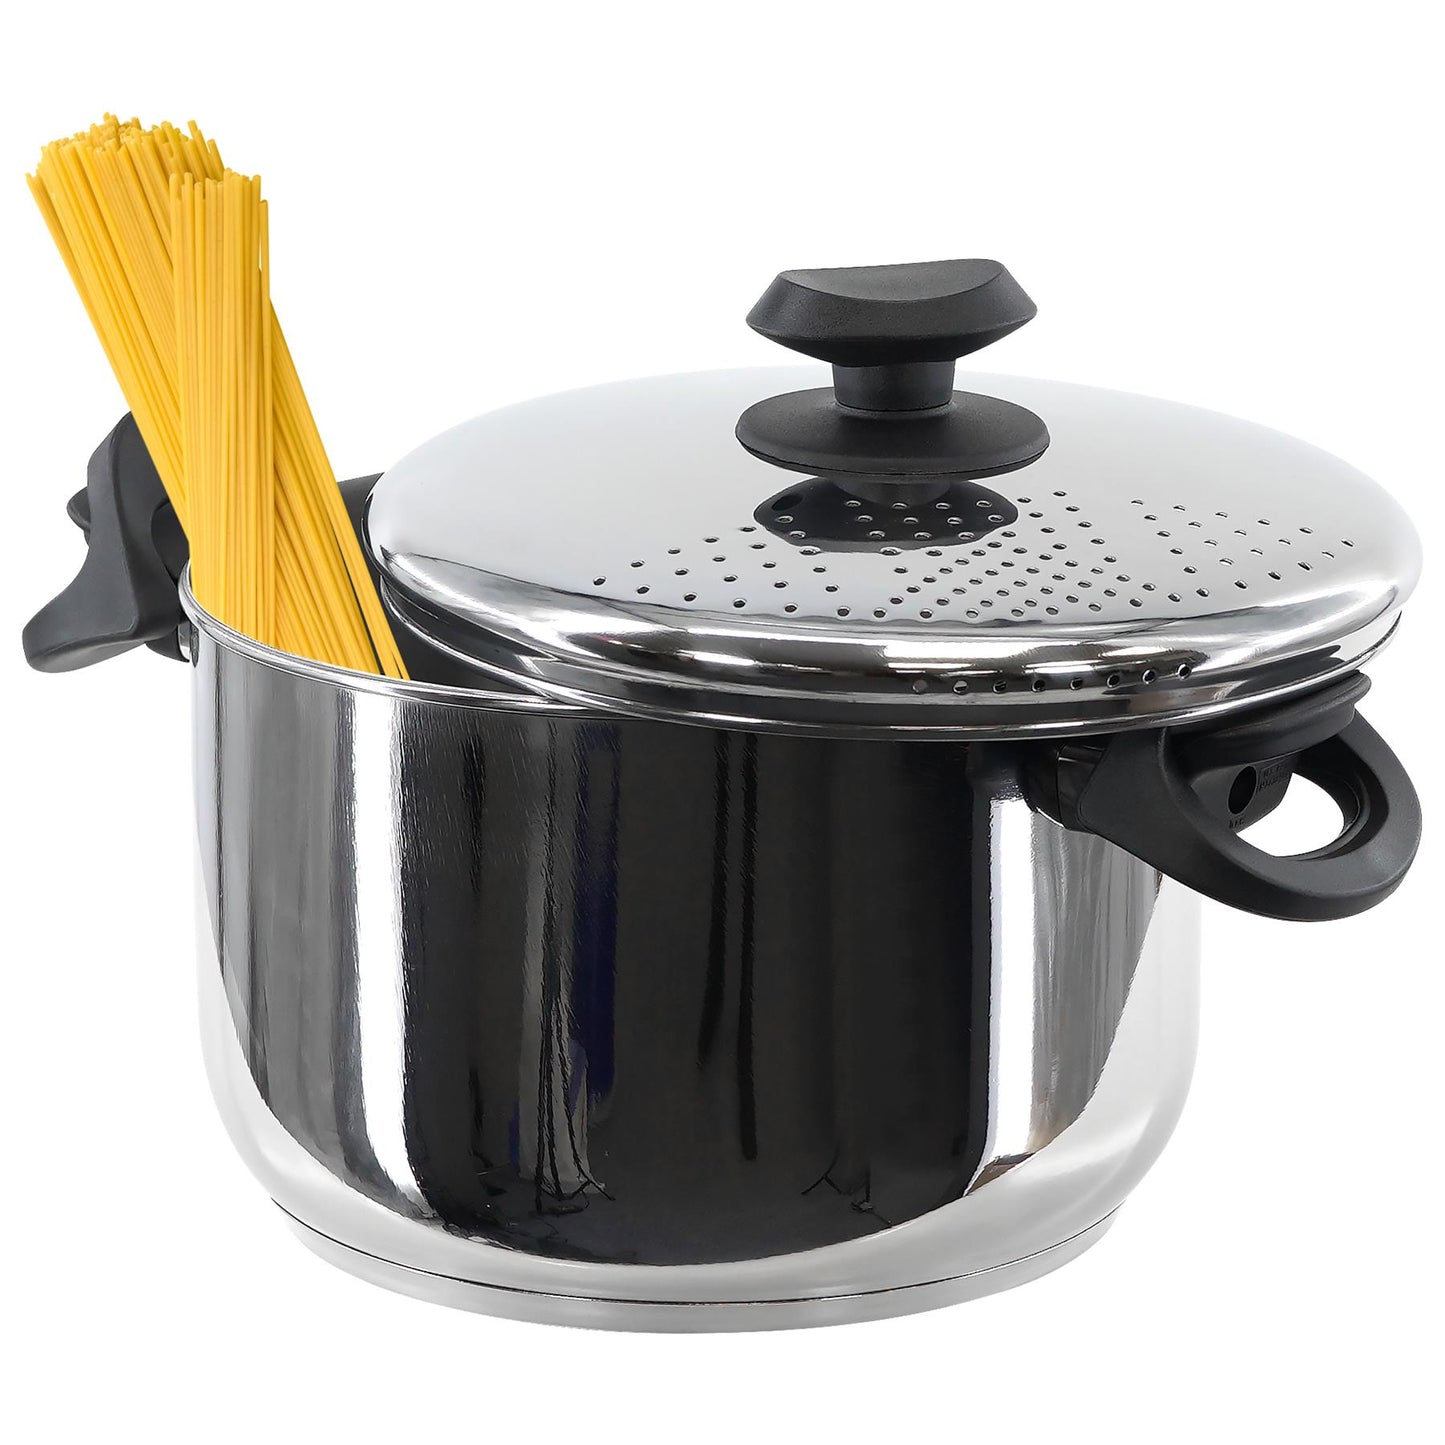 Stainless Steel Pasta Pot With Locking Strainer Lid by GEEZY - UKBuyZone